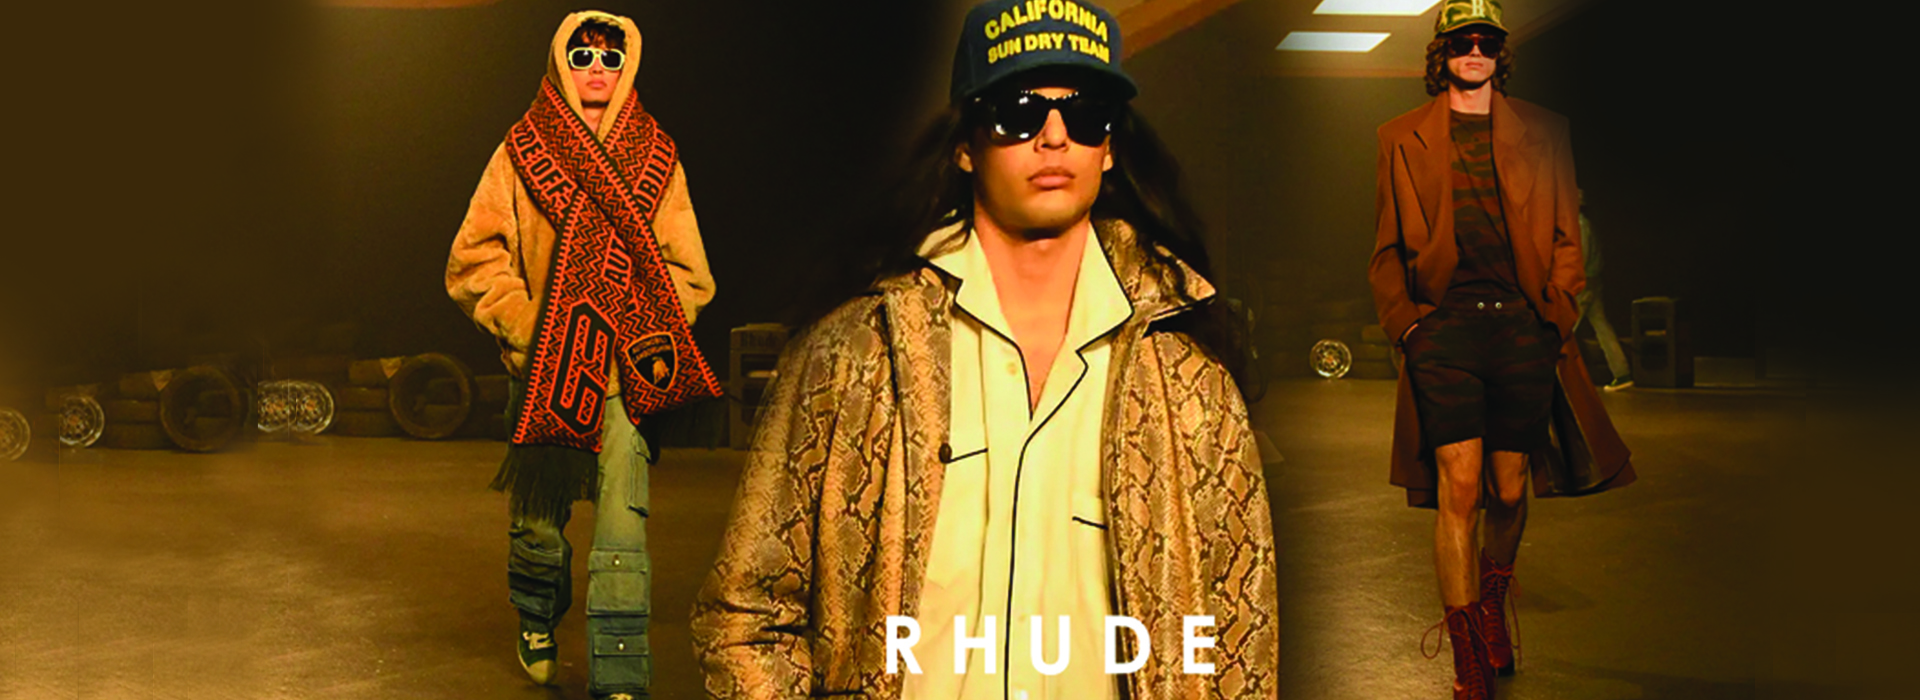 Behind the Brand: The Story of Rhude